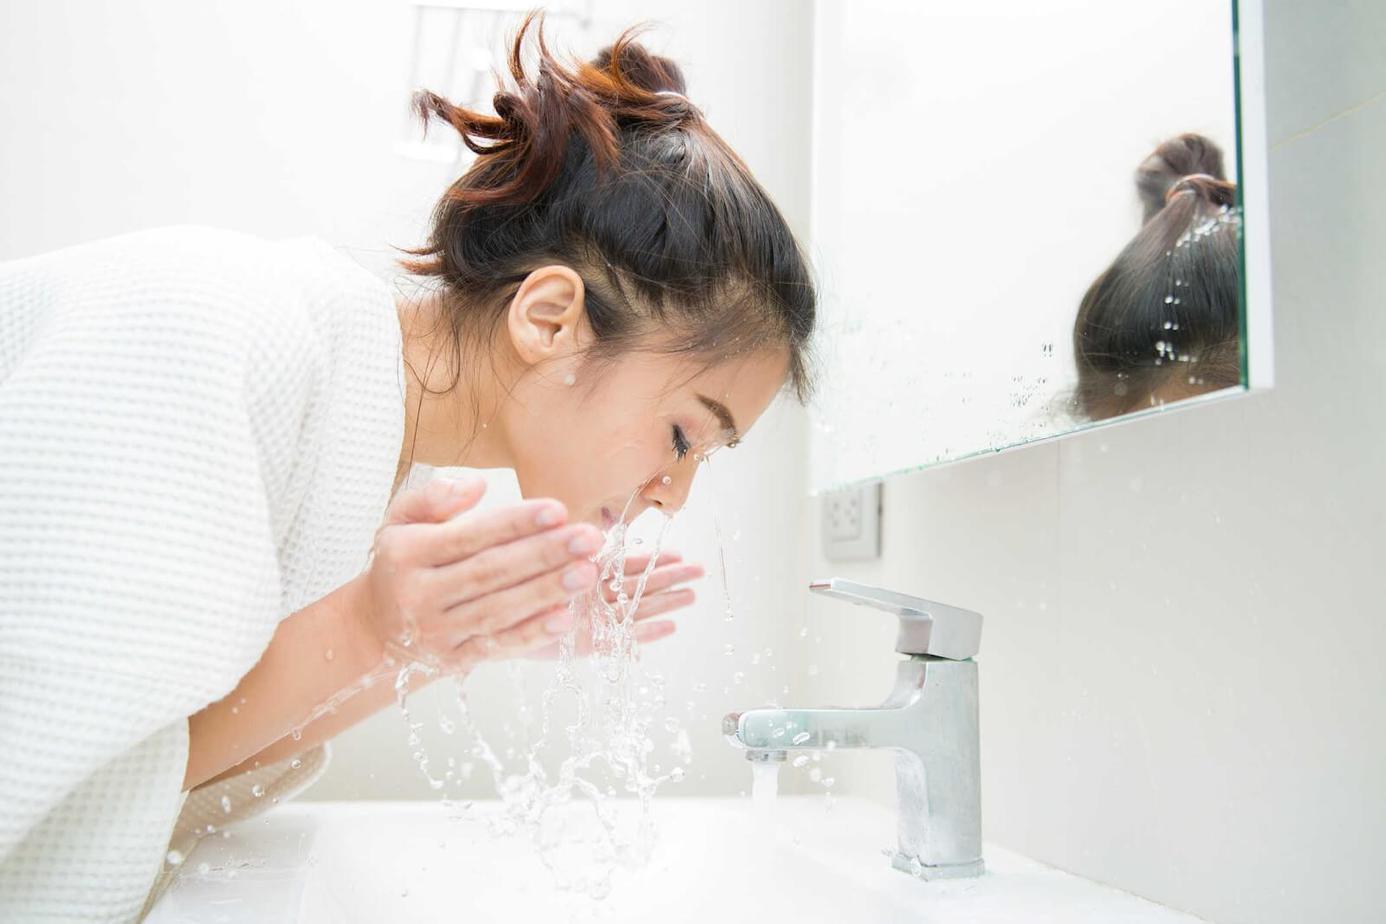 Washing Your Face Properly Is the First Step of Care for Beautiful Skin Notes